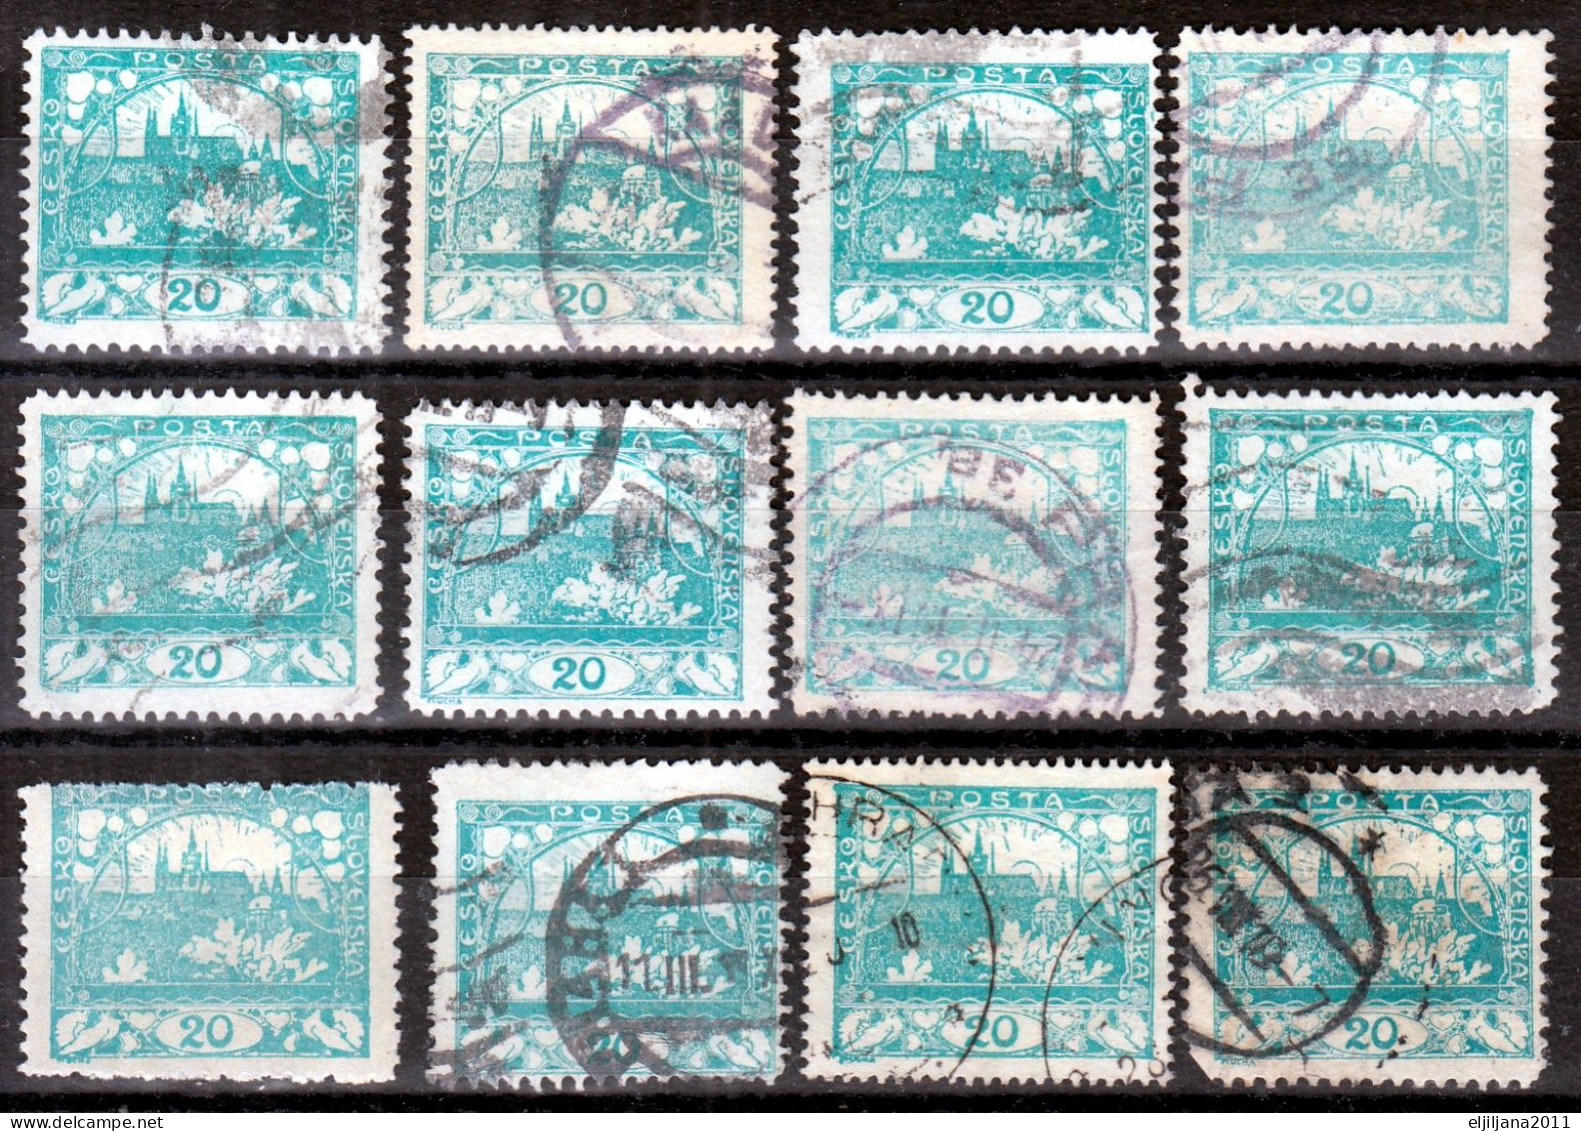 ⁕ Czechoslovakia 1918 Republic ( Castle Of Prague ) ⁕ Hradcany 20 H. Mi.4 A/C/D ⁕ 16v Used / Shades / Perf. Unchecked - Used Stamps